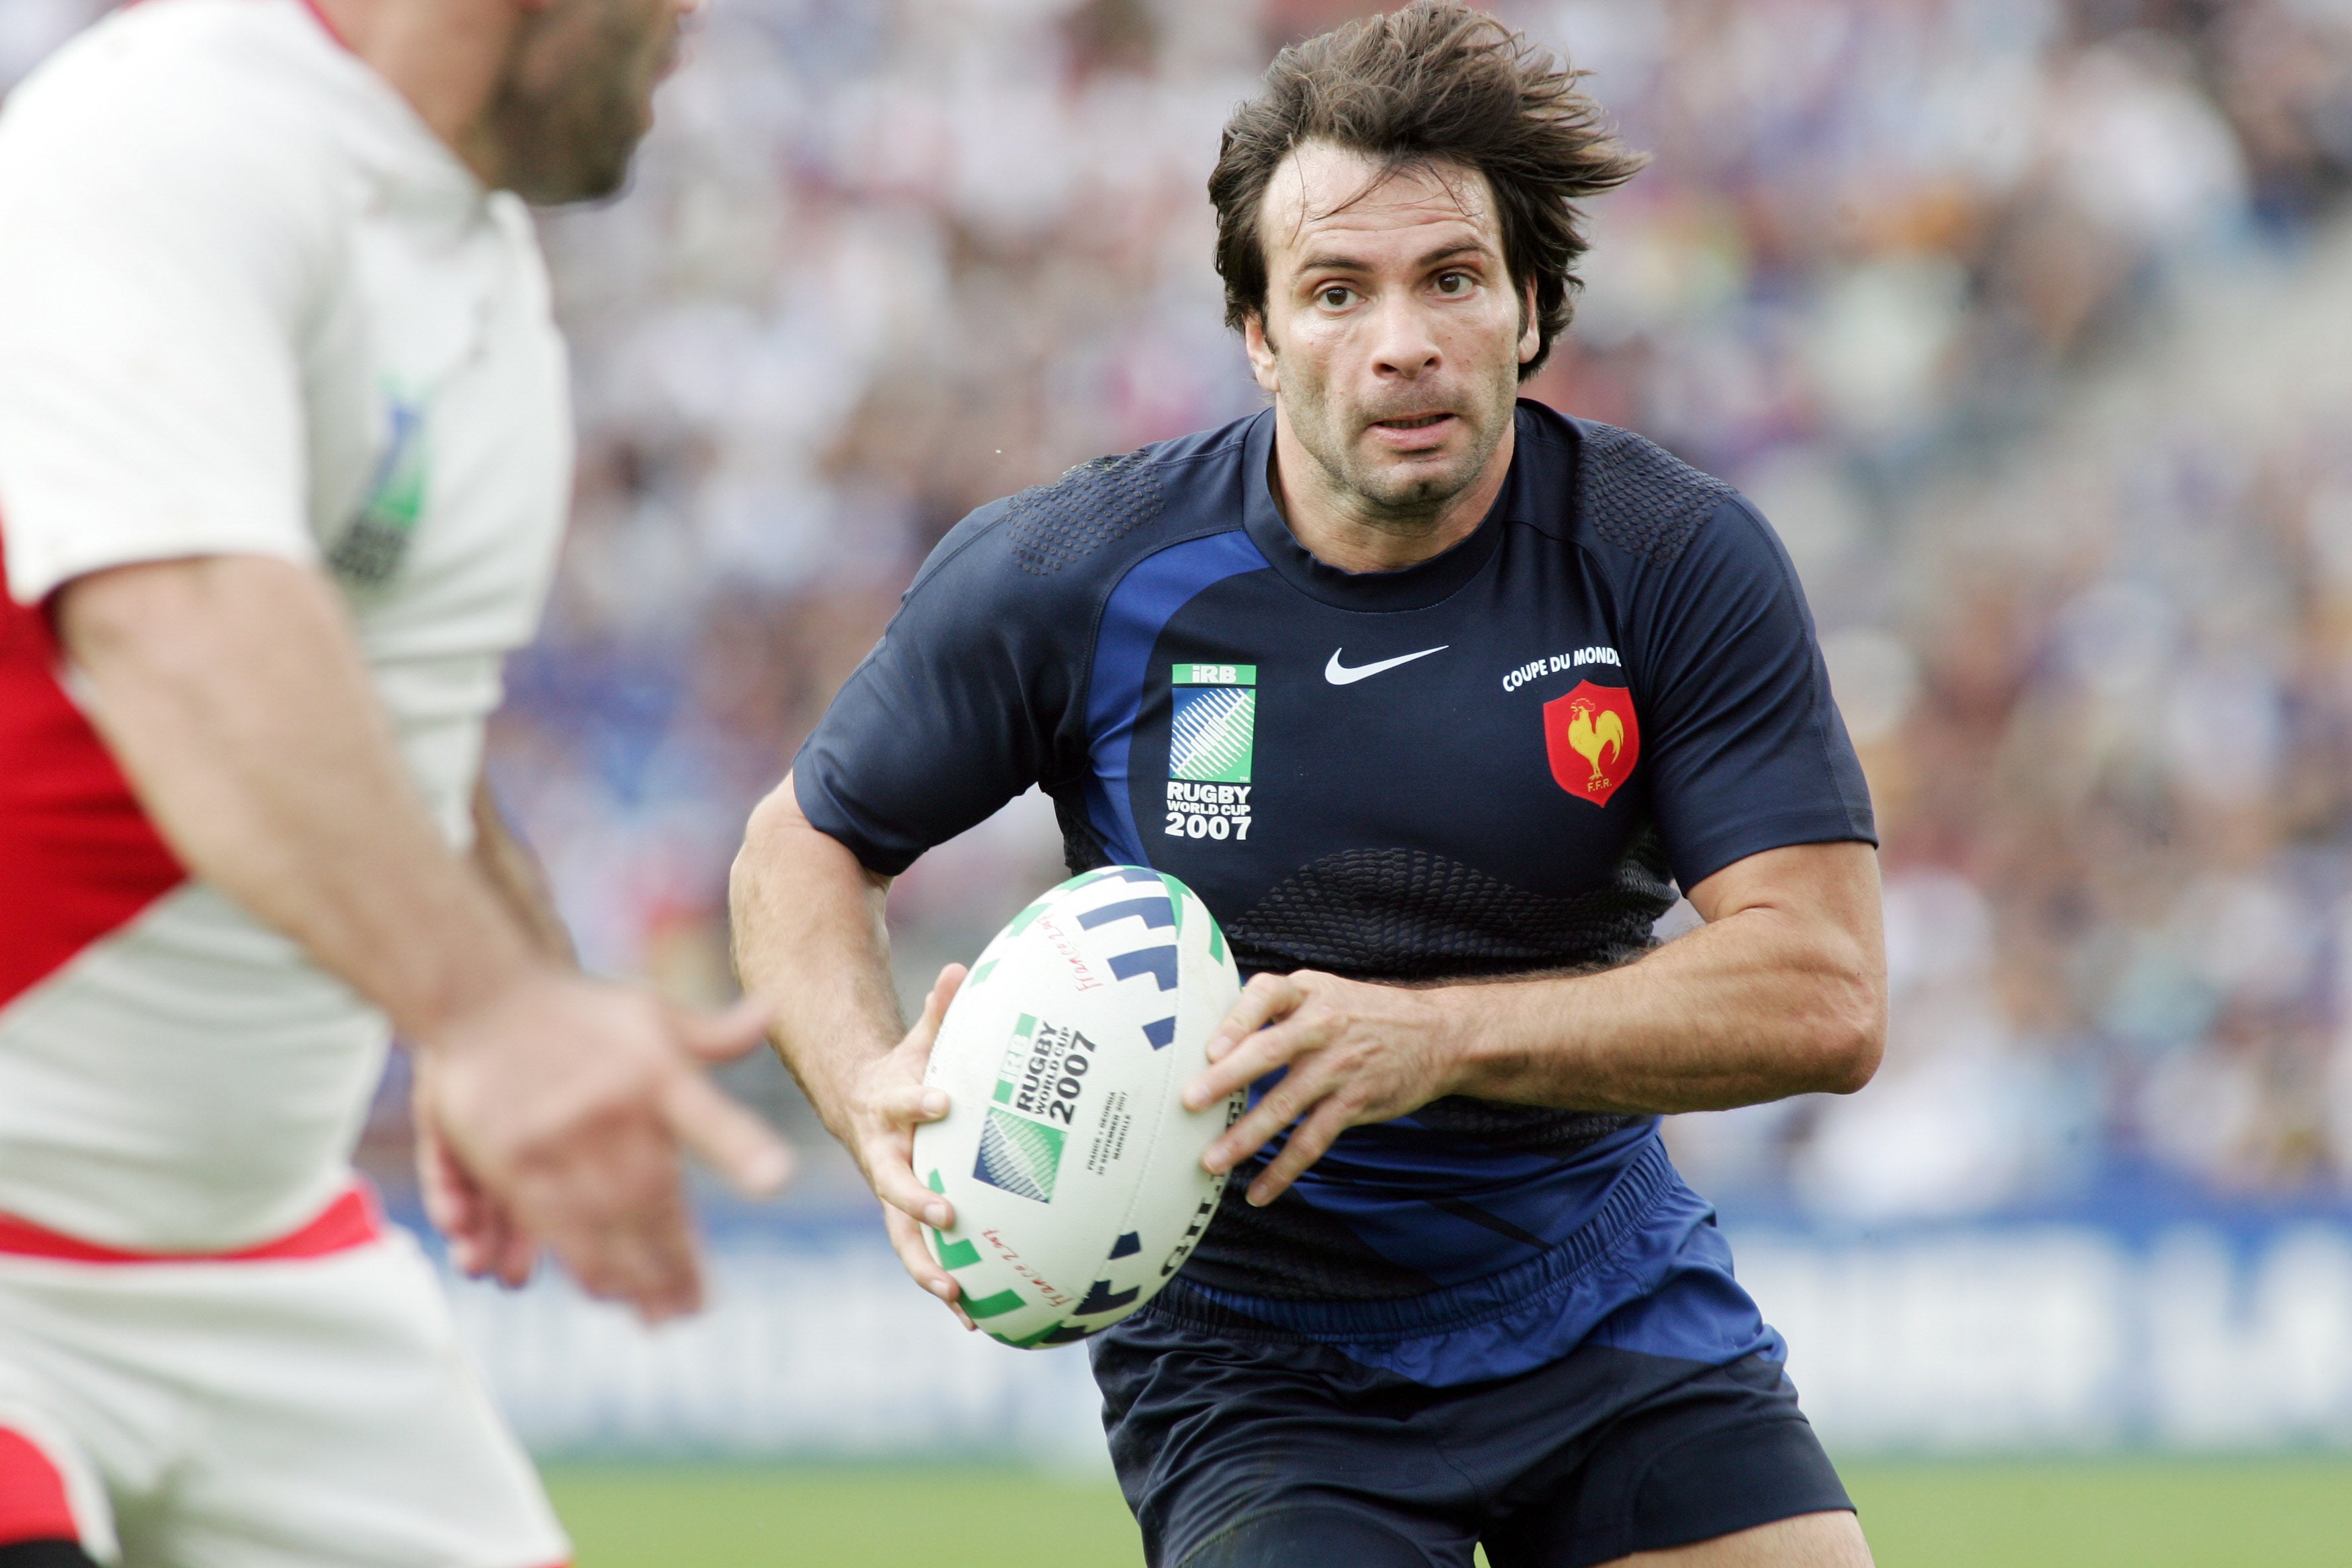 Dominici’s final France appearance came at the 2007 World Cup on home soil